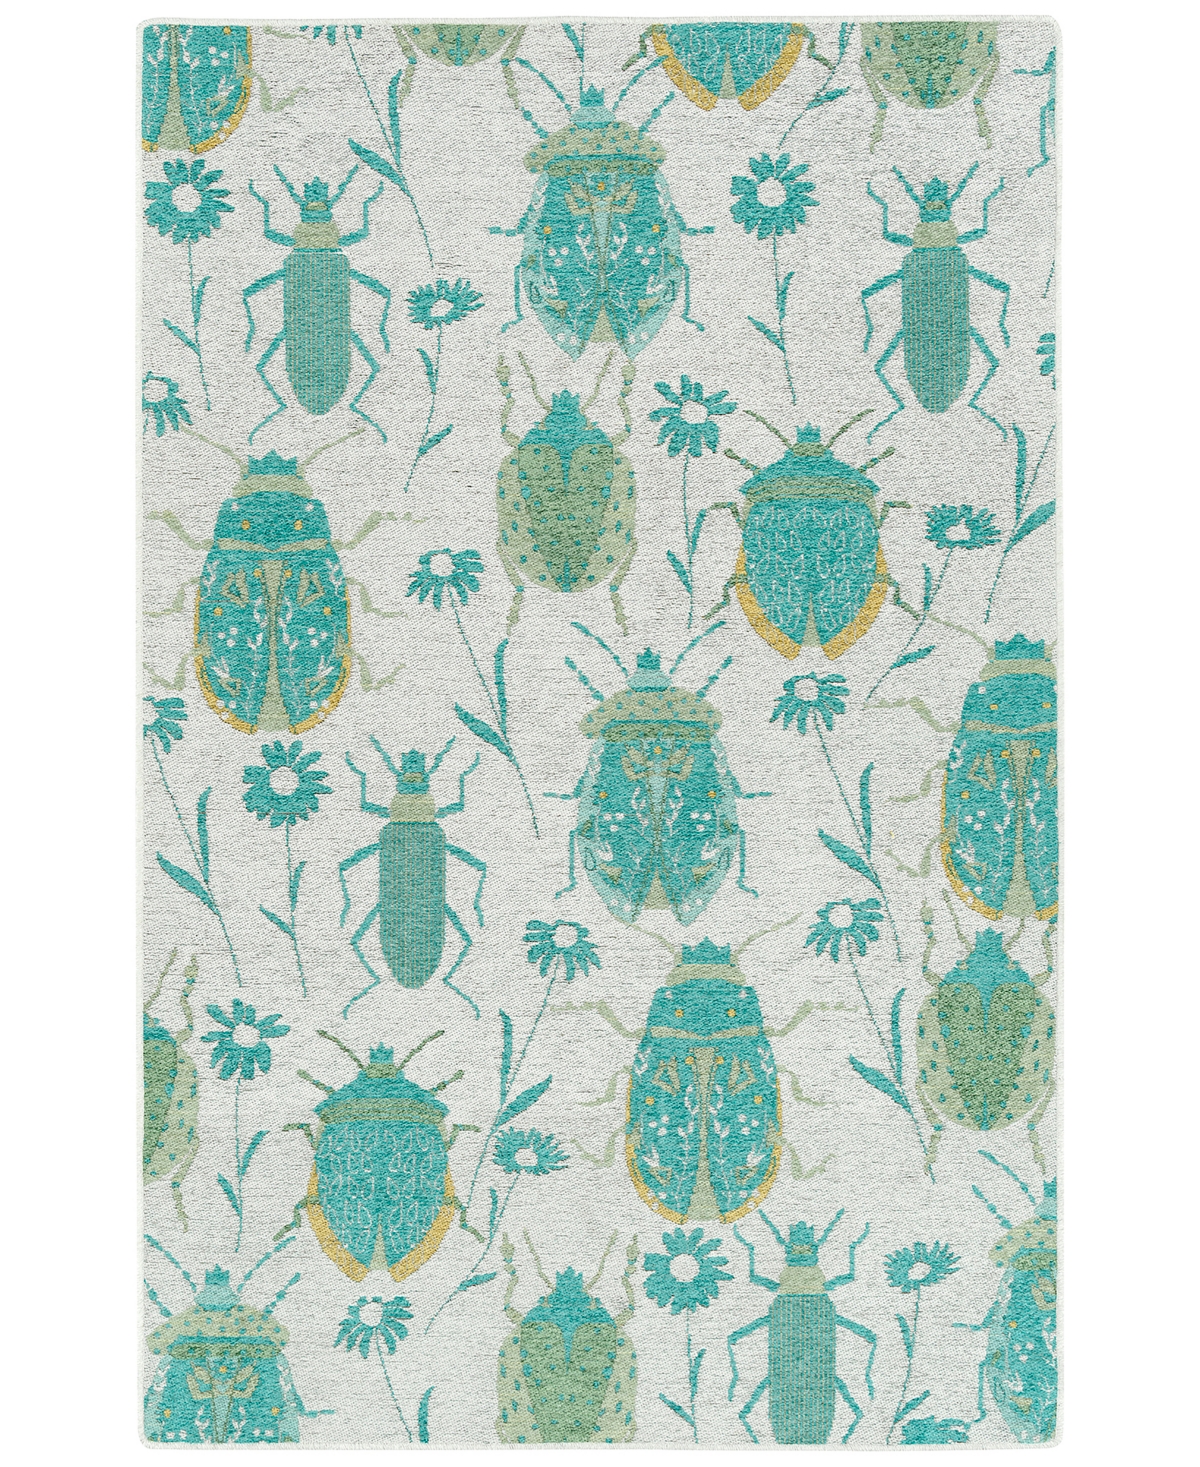 Hilary Farr Critter Comforts Hcc03-78 2' X 3' Area Rug In Turquoise